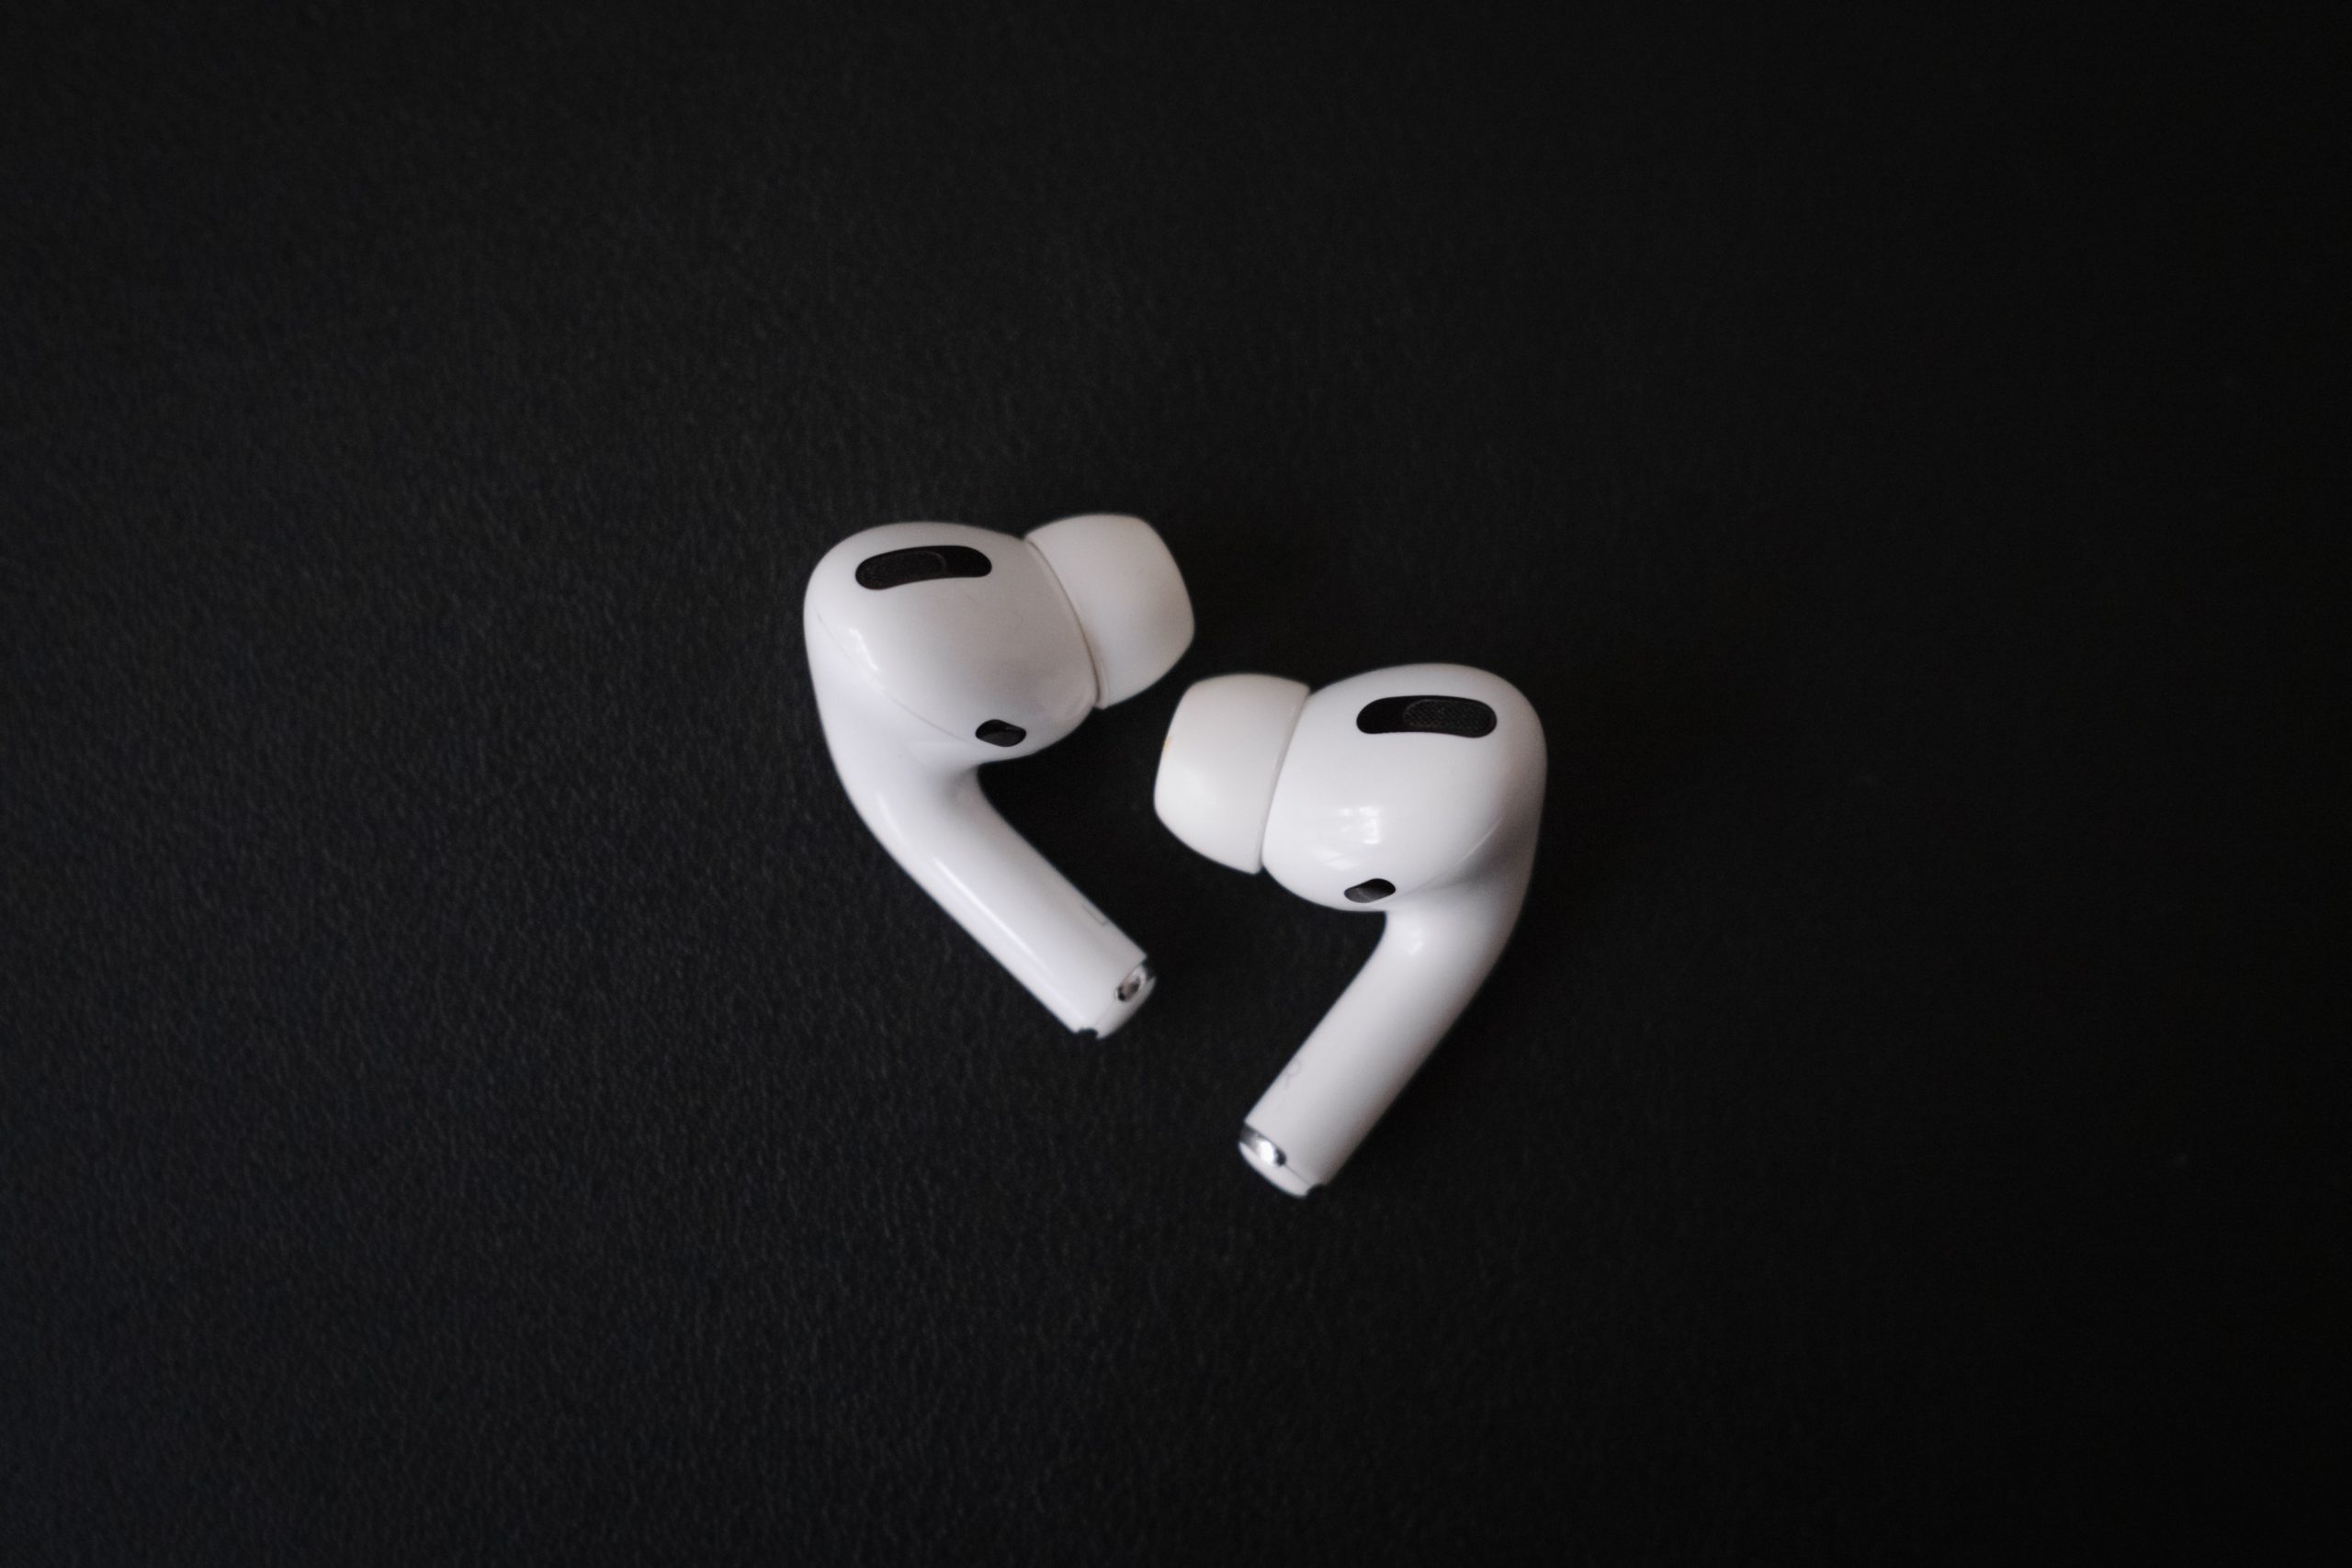 Apple Insider Claims AirPods Pro 2, But There's a Catch